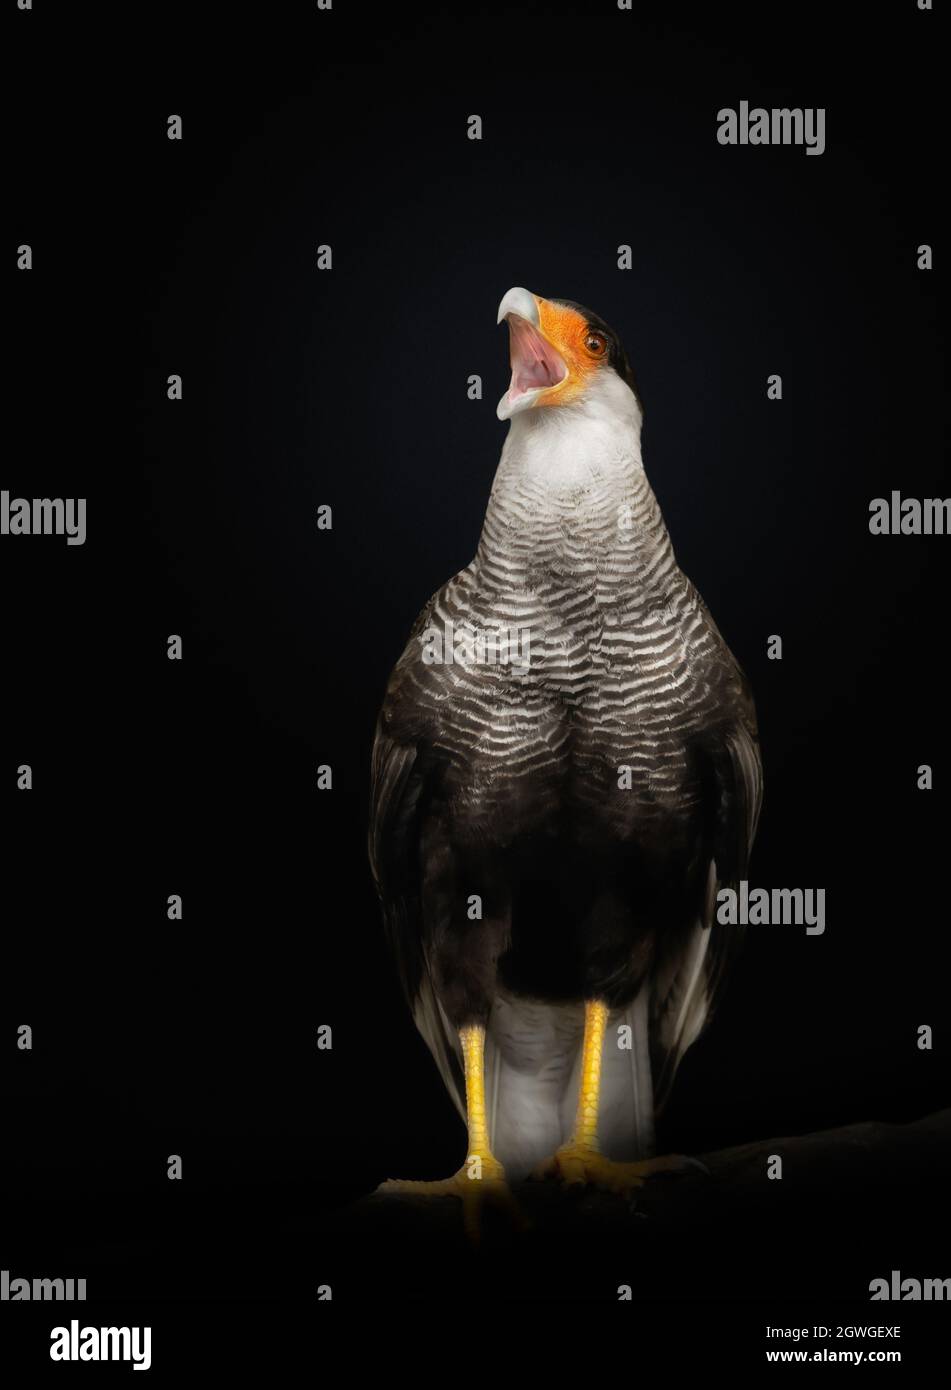 Close up of a Southern crested caracara calling against black background, Pantanal, Brazil. Stock Photo